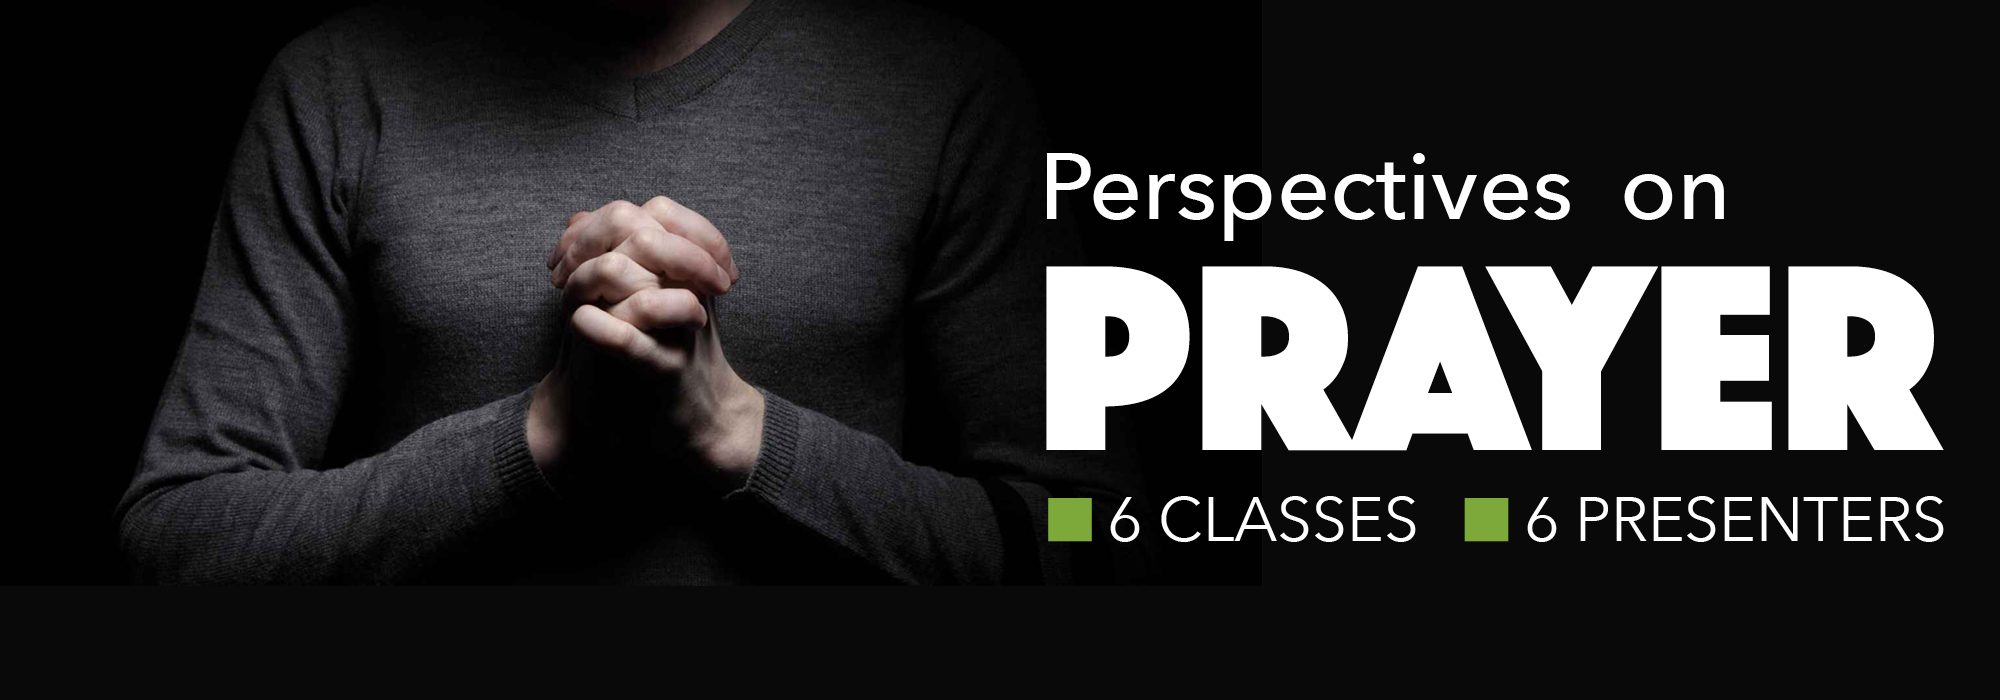 Perspectives on Prayer, a 6 week class on different types of prayer.